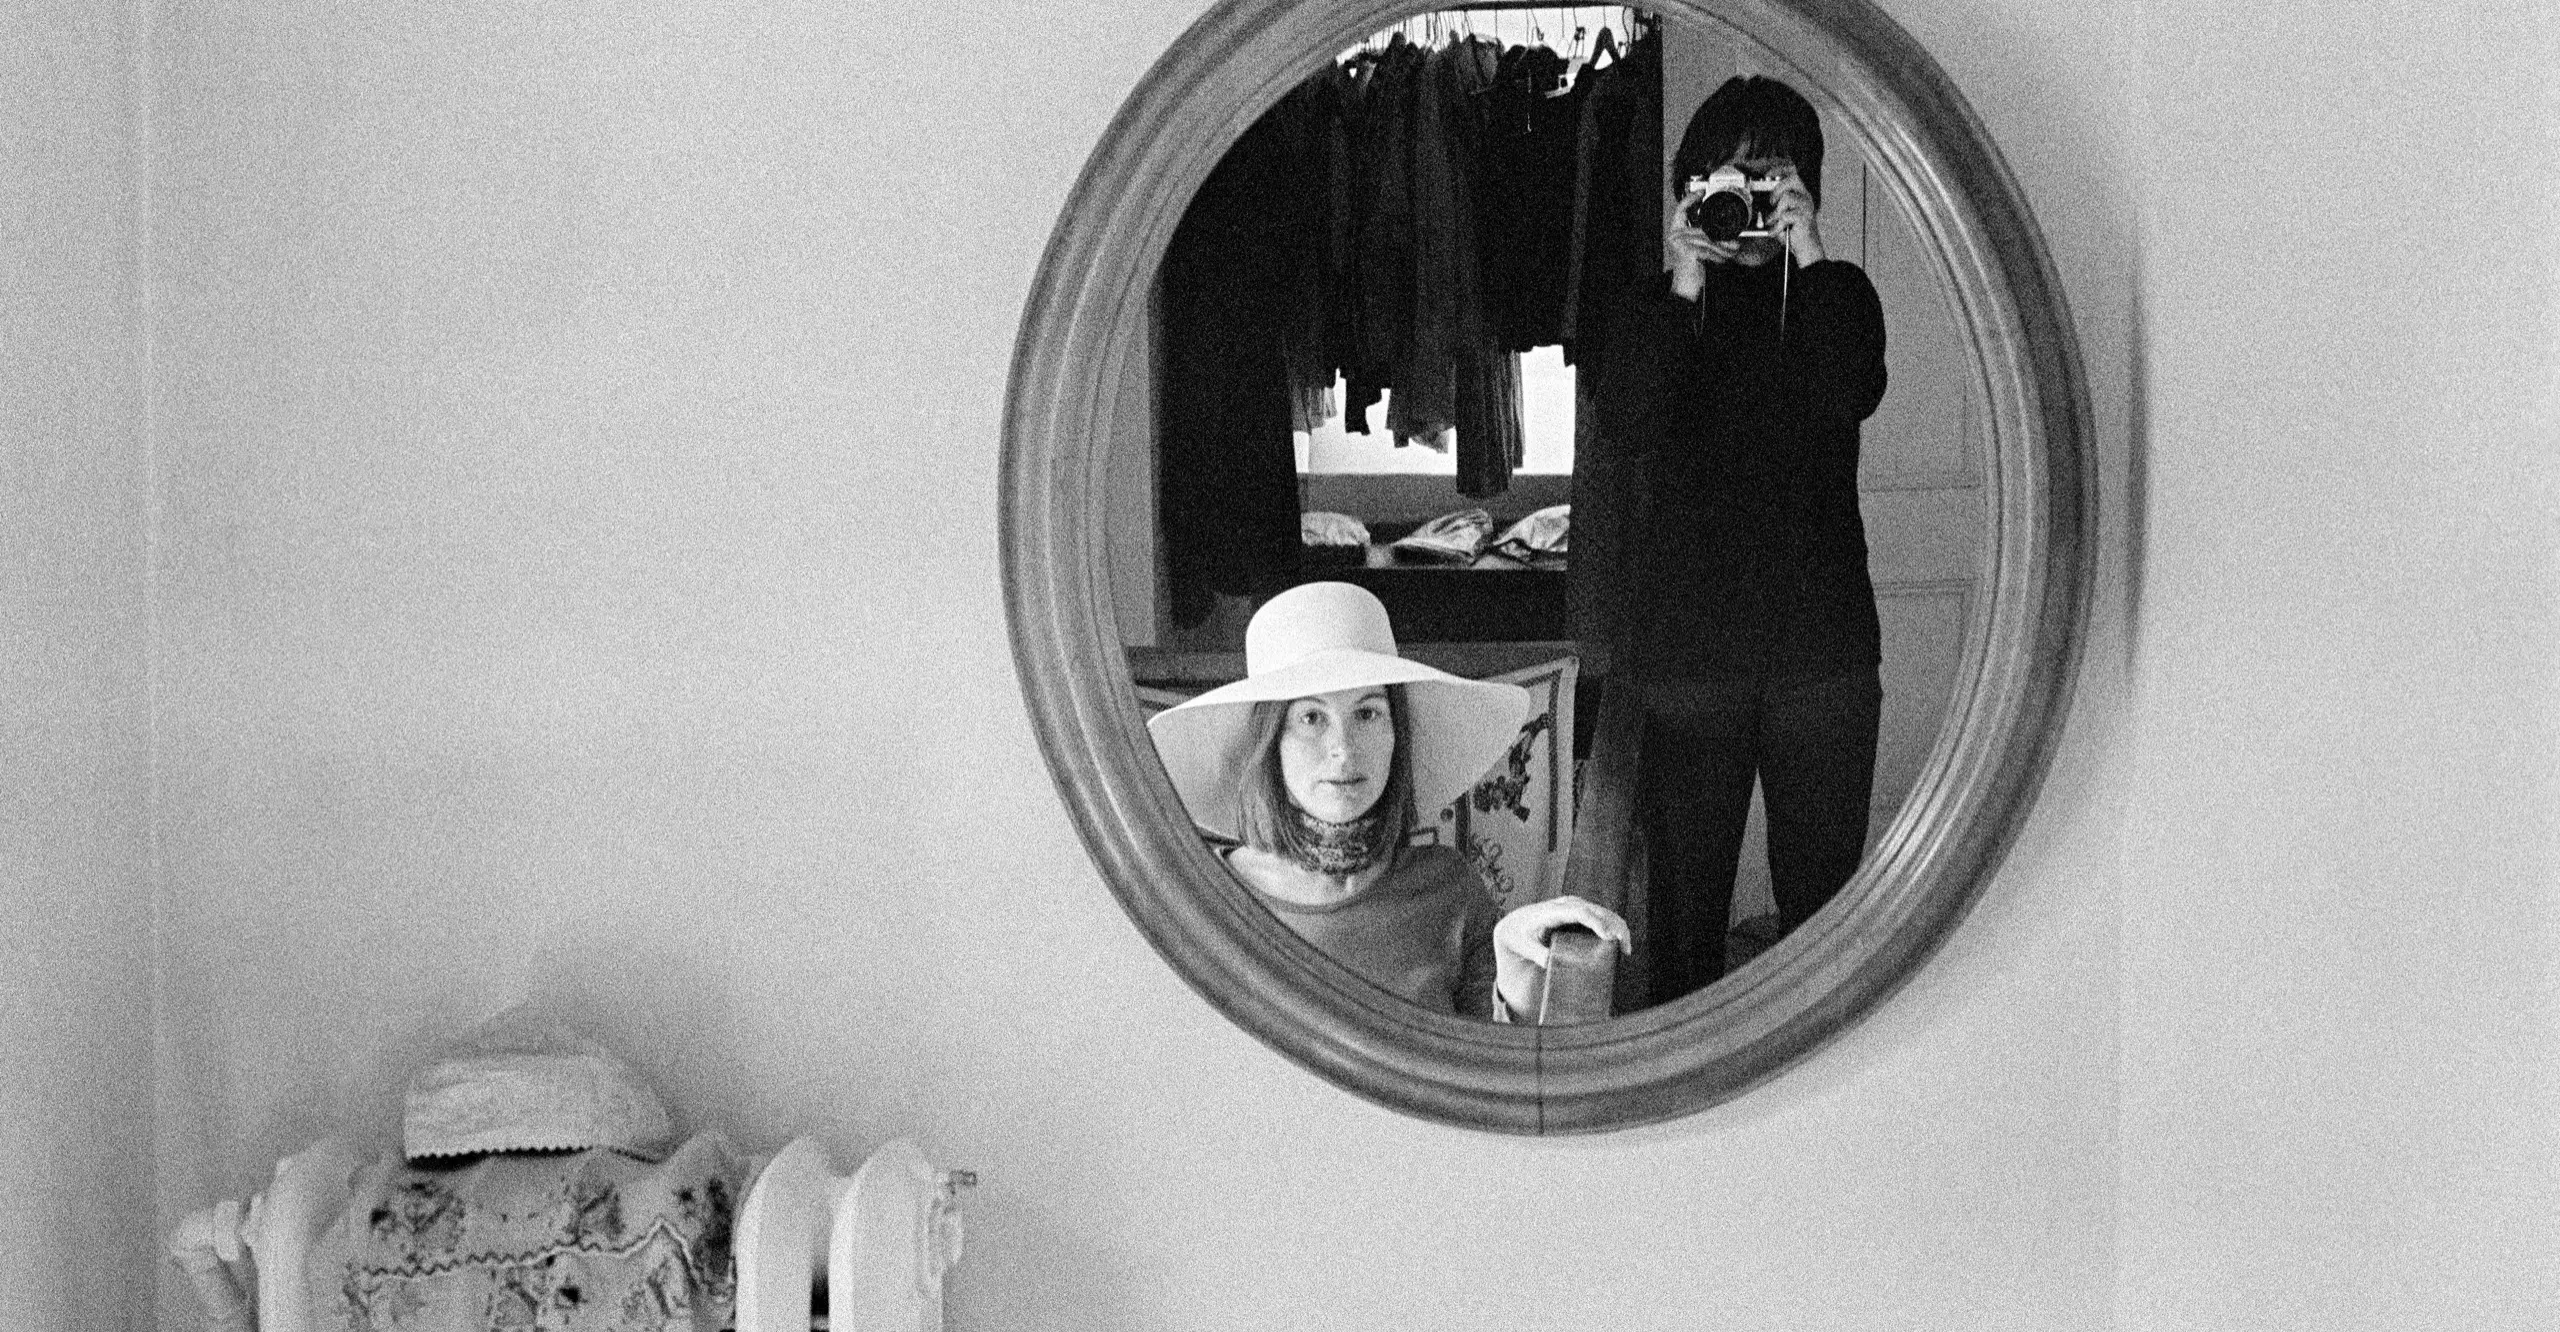 Black and white image of Evelyn Hofer's reflection in a round mirror